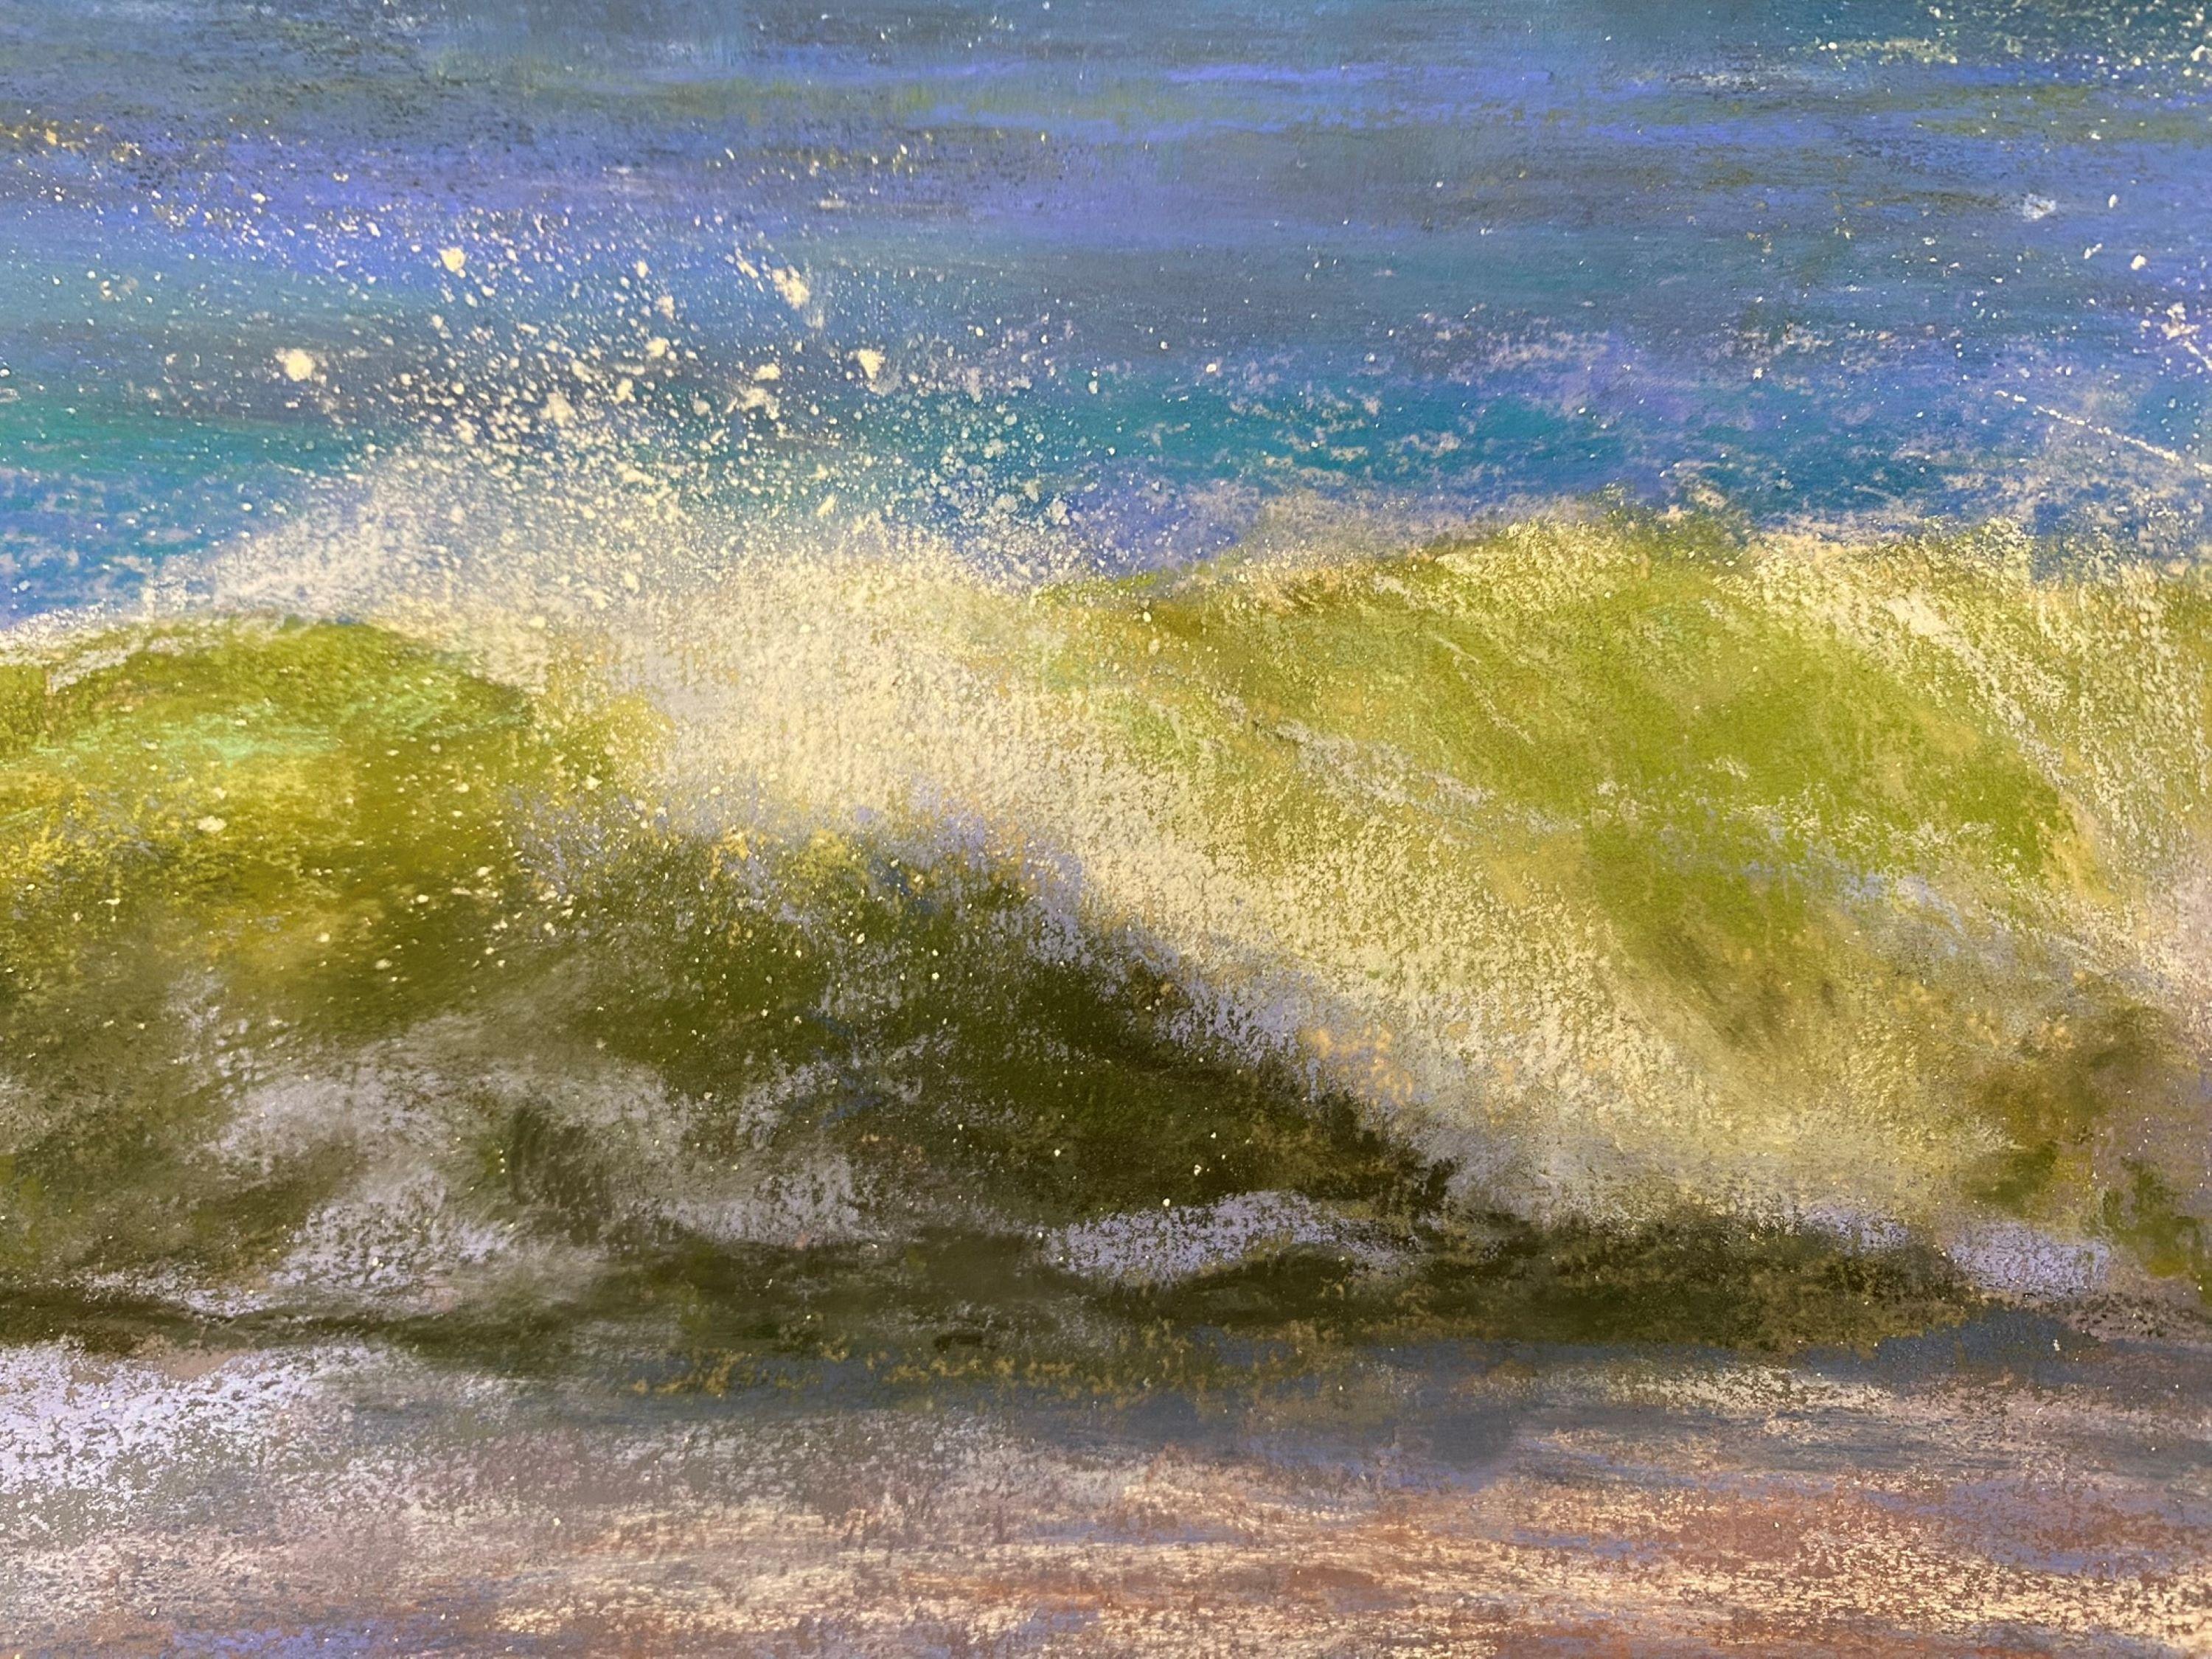 Postcard from the Shore 
9.0 x 12.0 x 1.0, 1.0 lbs 
Pastel on archival paper
Hand signed by artist 

Artist's Commentary: 
“'Postcard From The Shore' is a painting done as a demo for a three-day workshop I taught at the Artist Association of